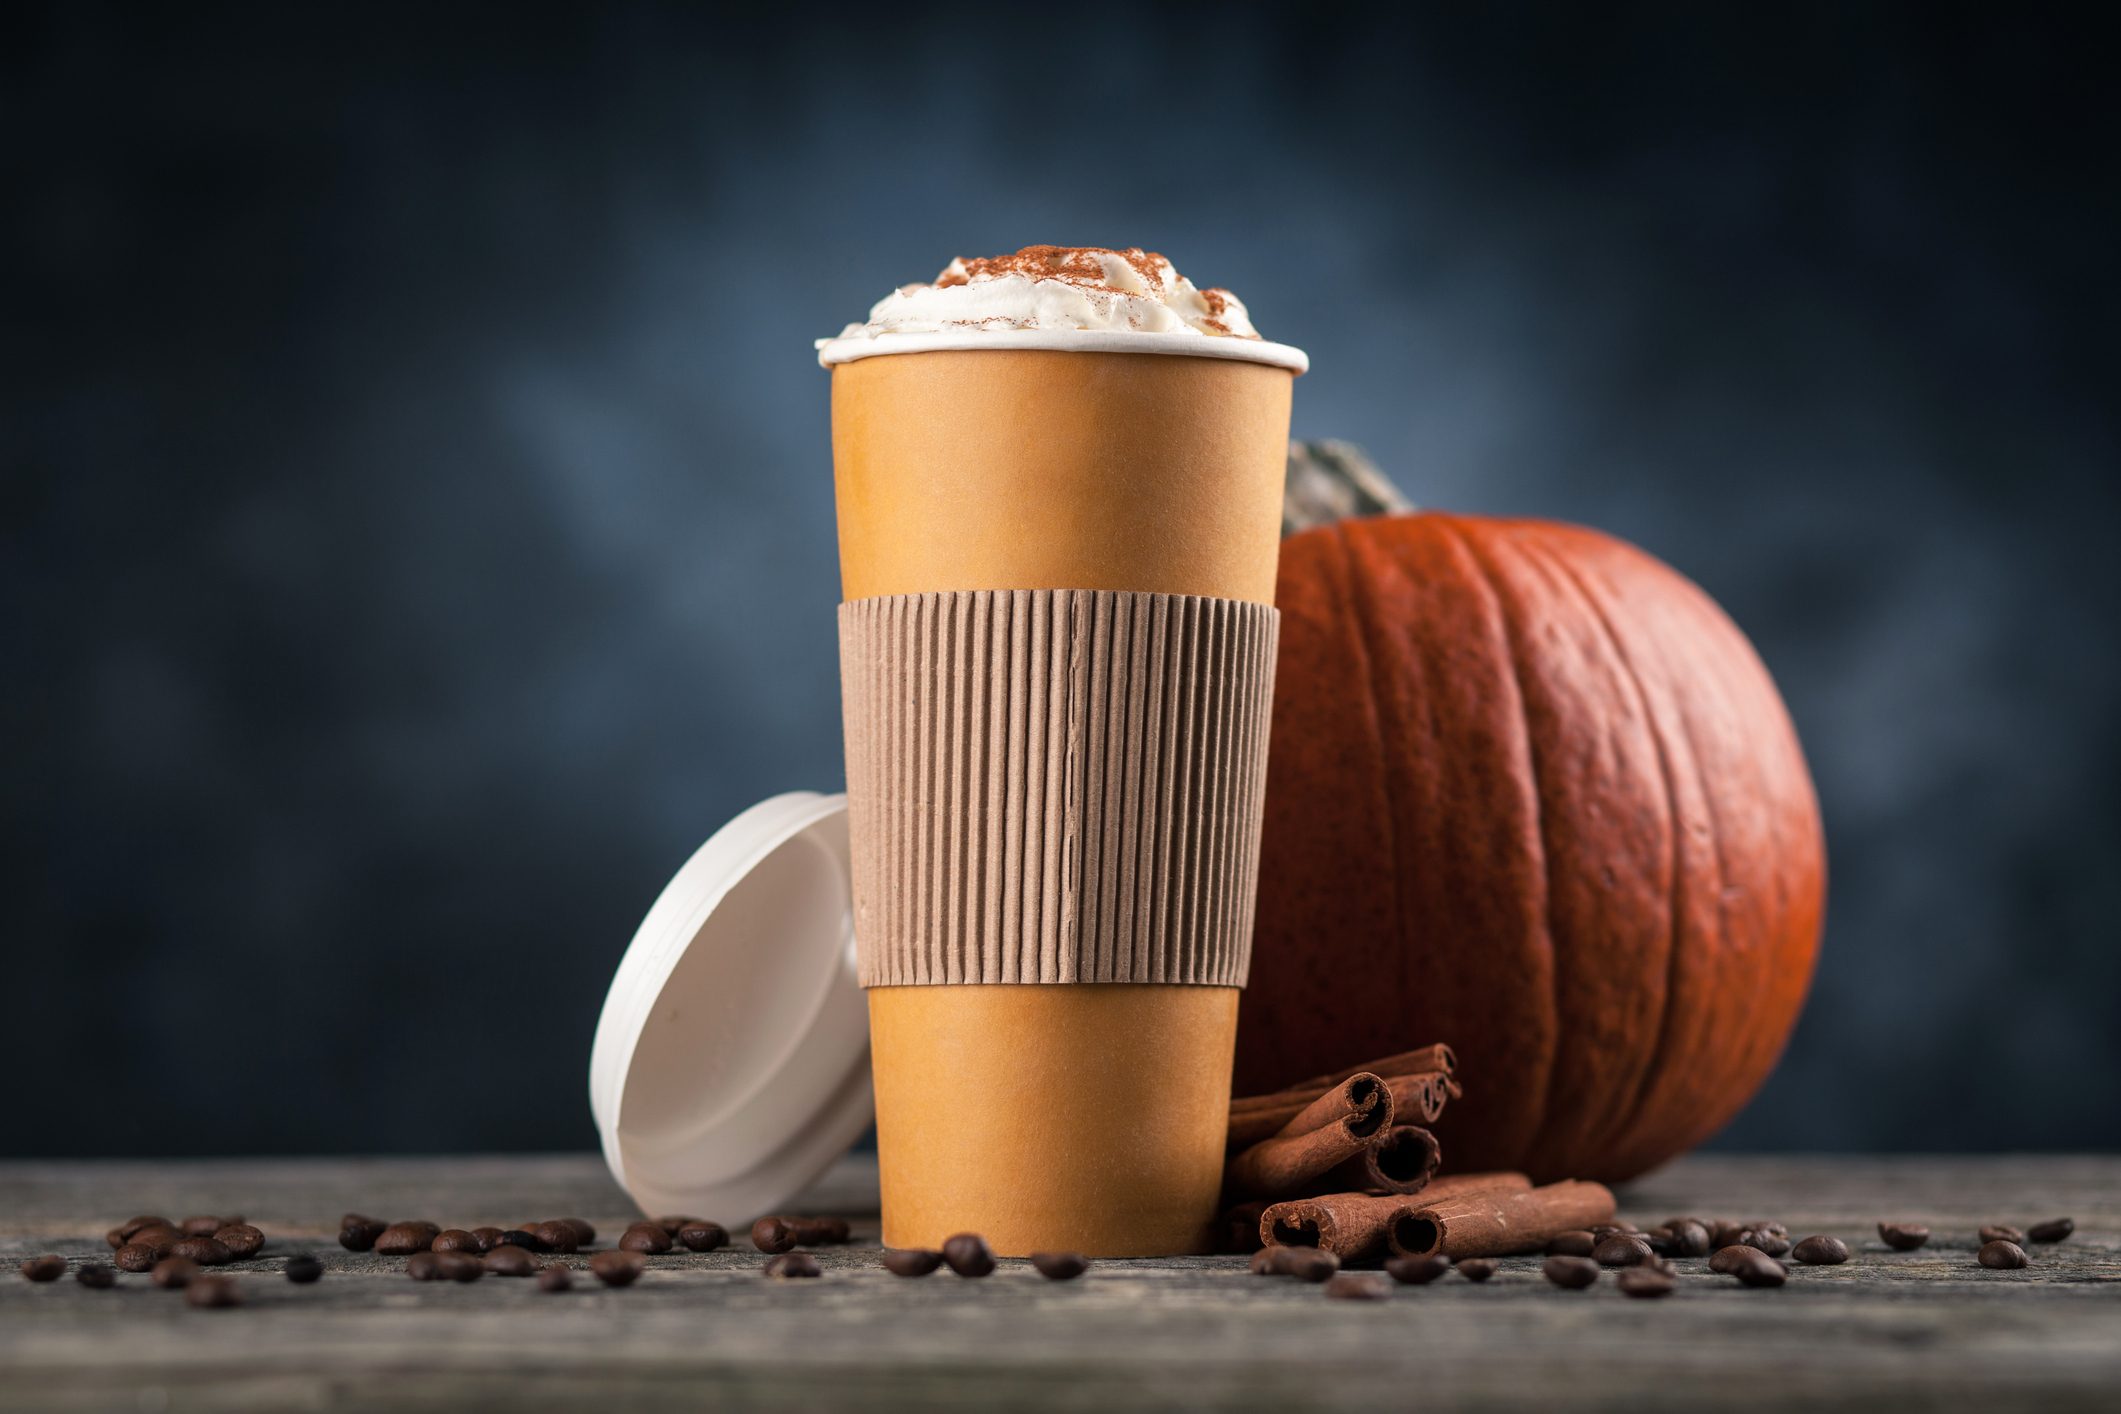 Pumpkin spice latte in a paper cup on dark background in front of a pumpkin